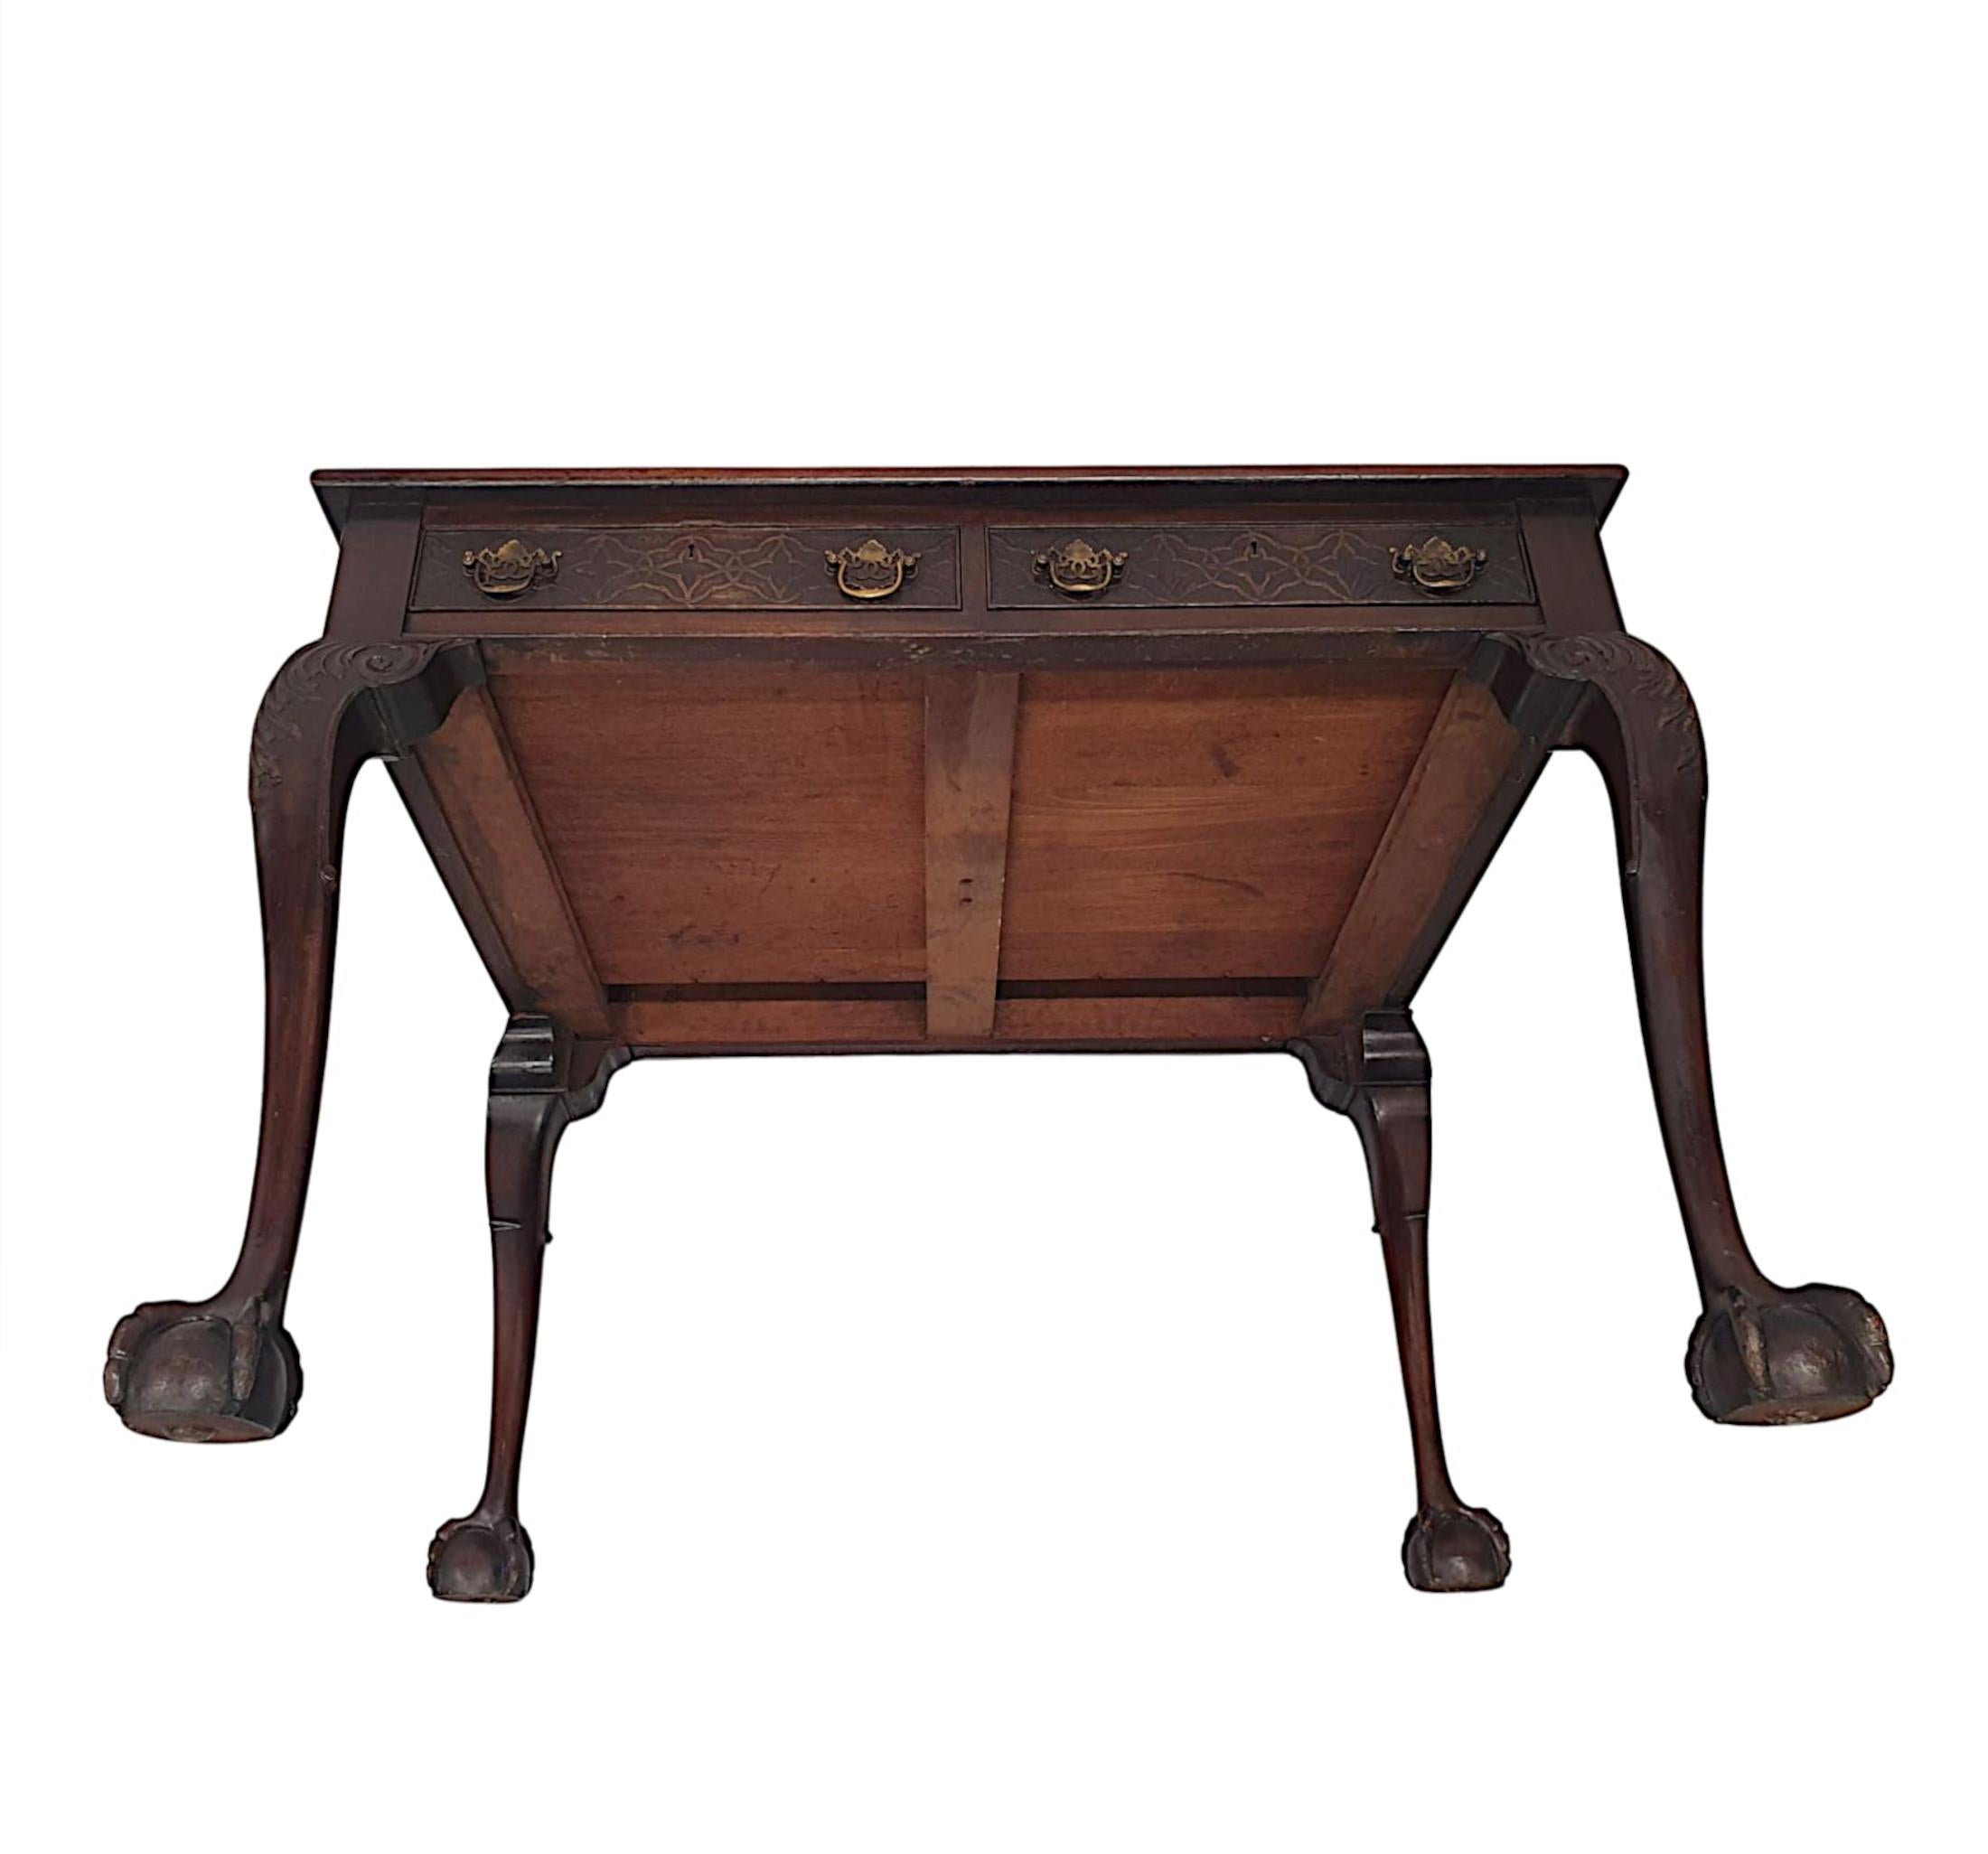 Stunning Late 19th Century Desk in the Thomas Chippendale Manner For Sale 9